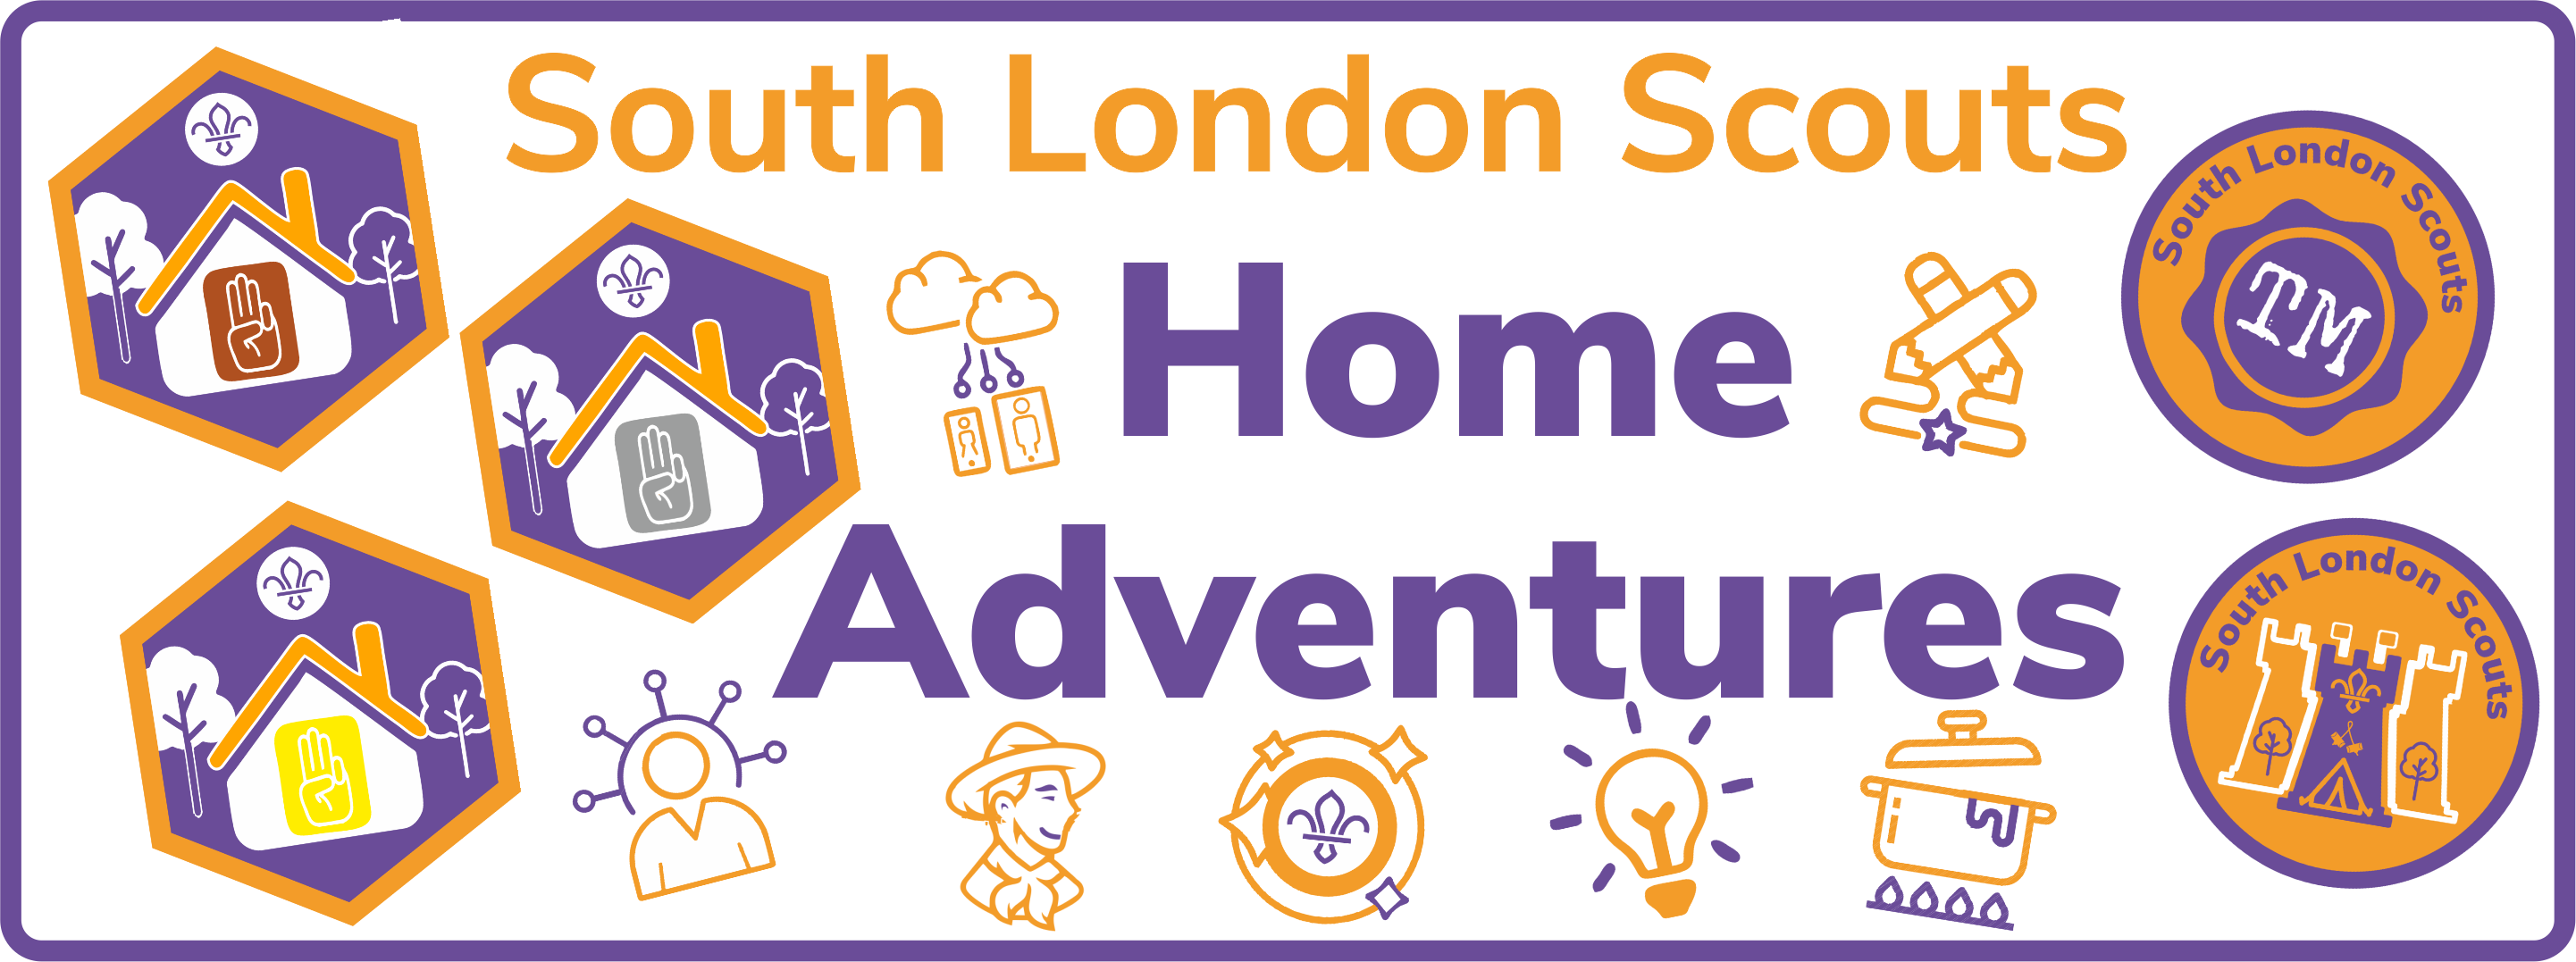 South London Scouts - Home Adventures